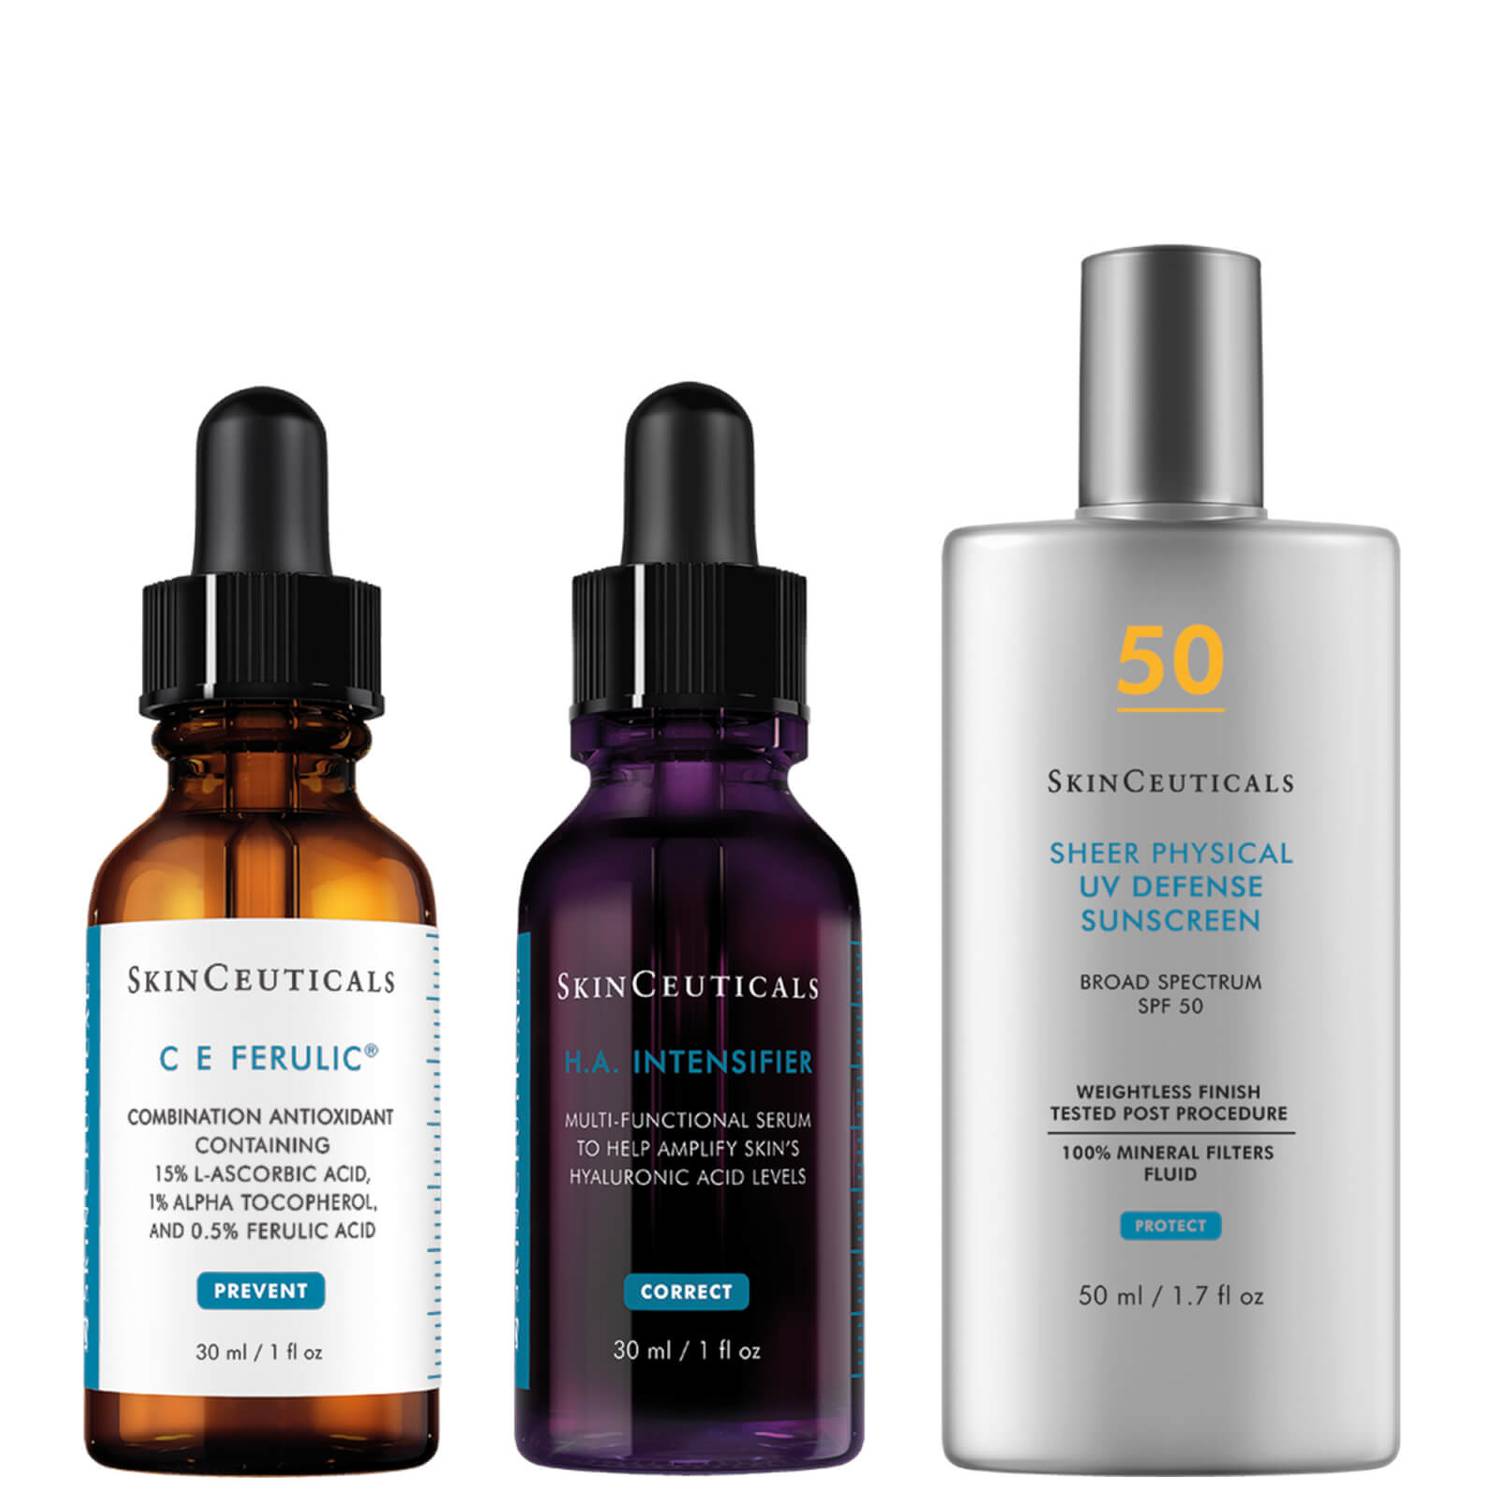 SkinCeuticals Plumping Vitamin C and Mineral Sunscreen Hyaluronic Acid Kit